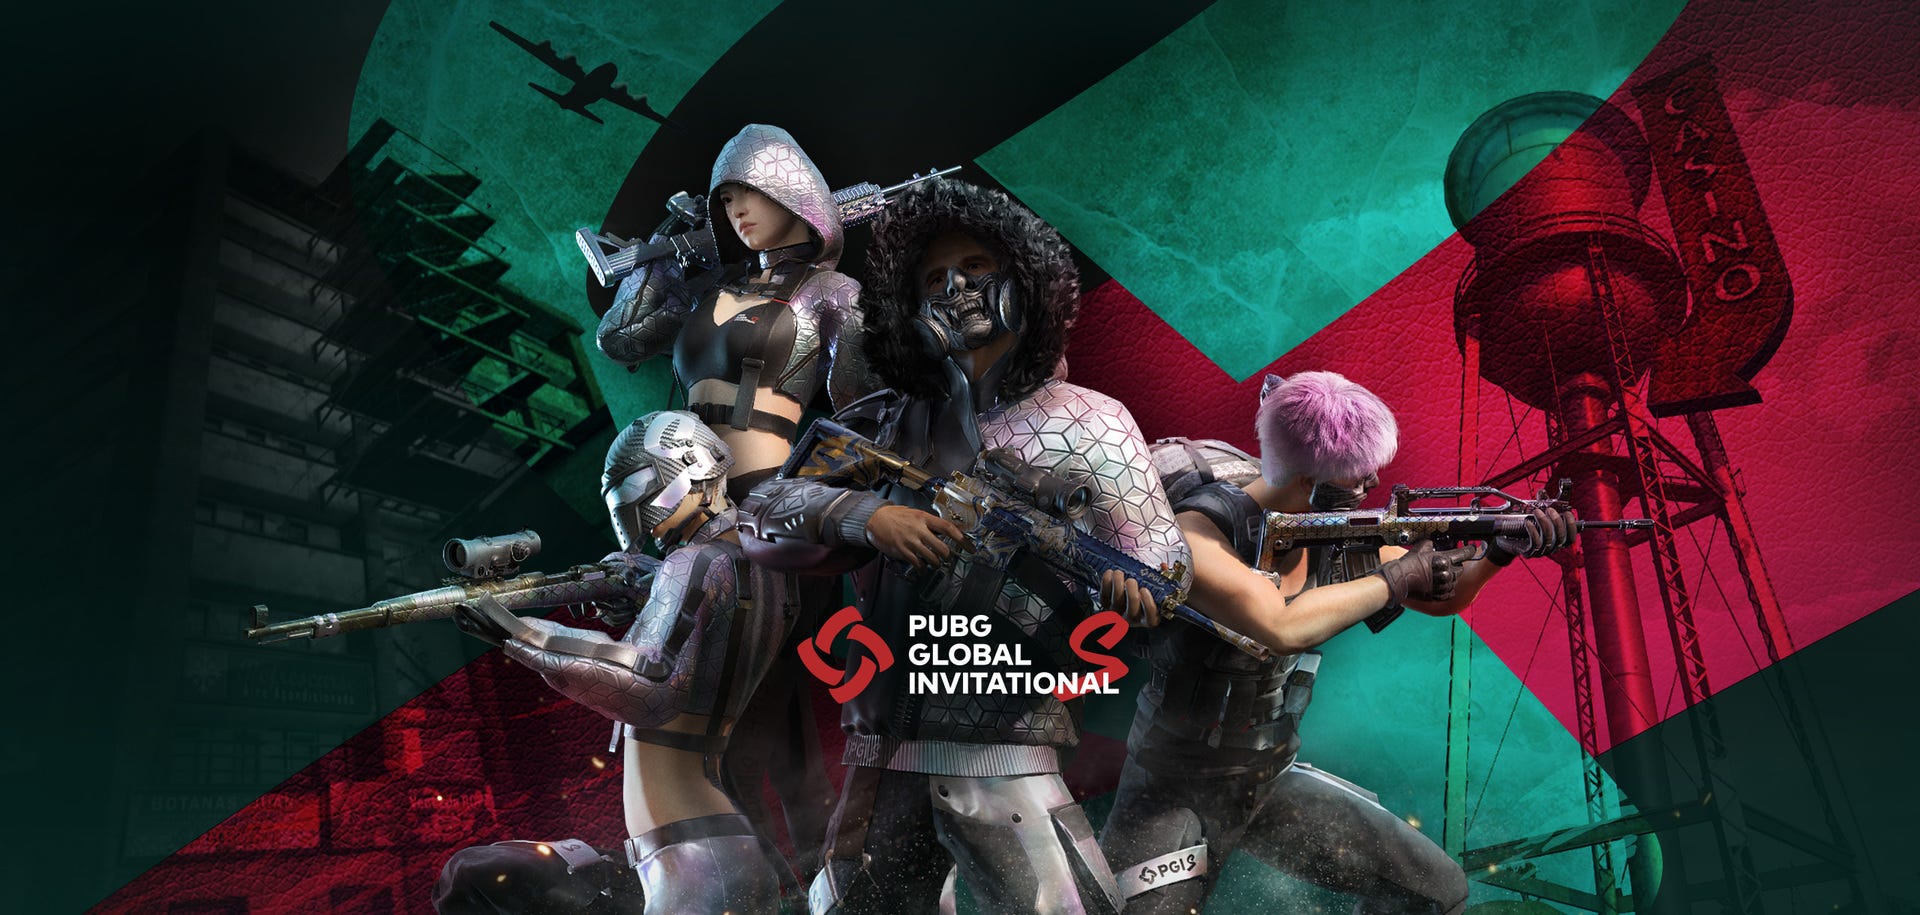 21 Pubg Global Invitational S Preview Part 2 Attack Of The East By Patryk Pattrick Swierzy Medium